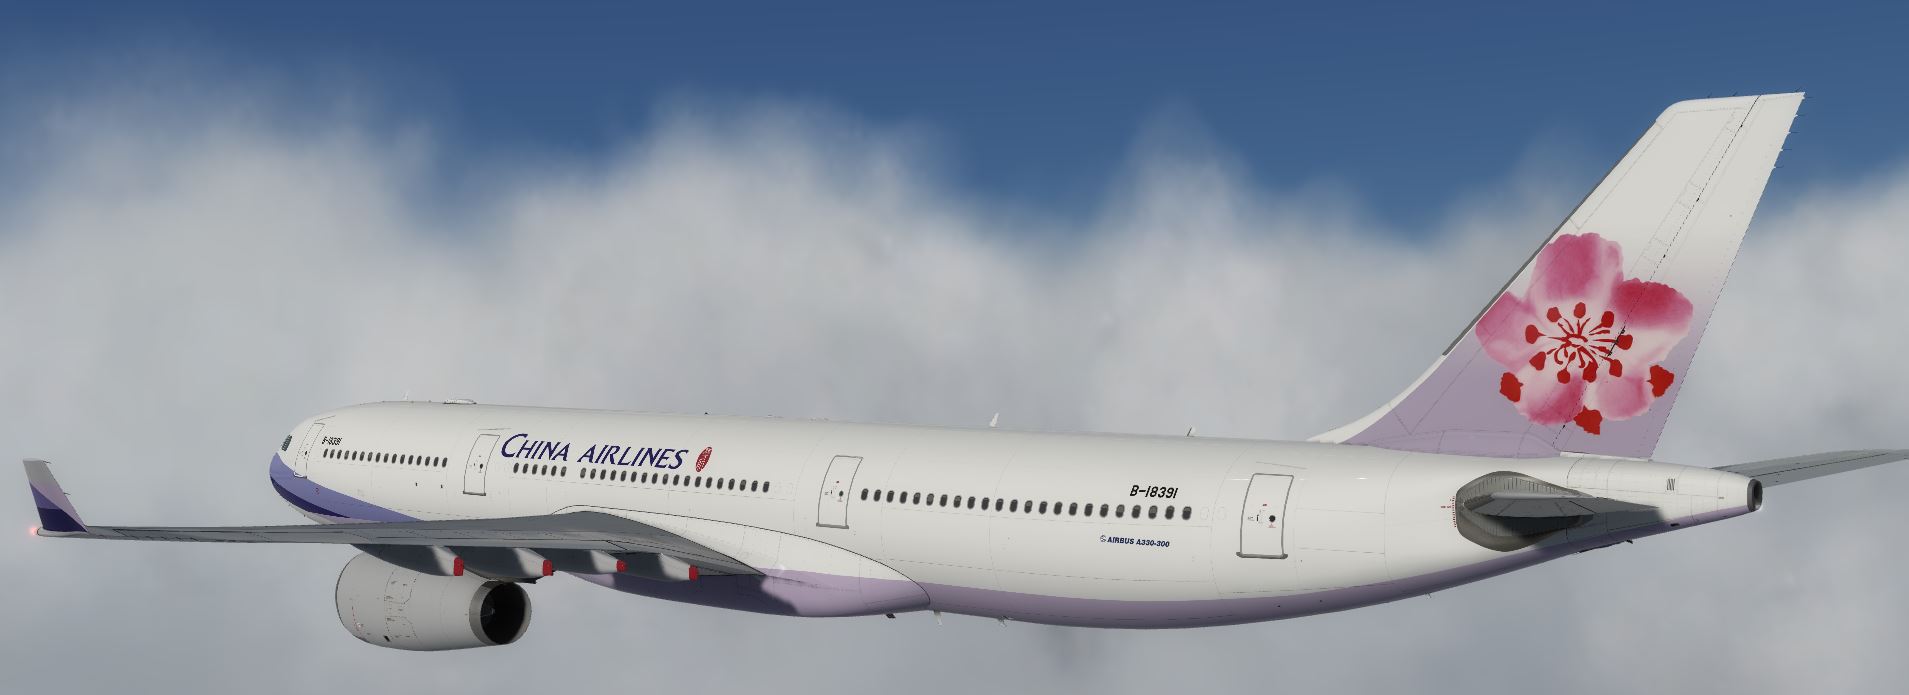 AS A330 ChinaAirline-1679 